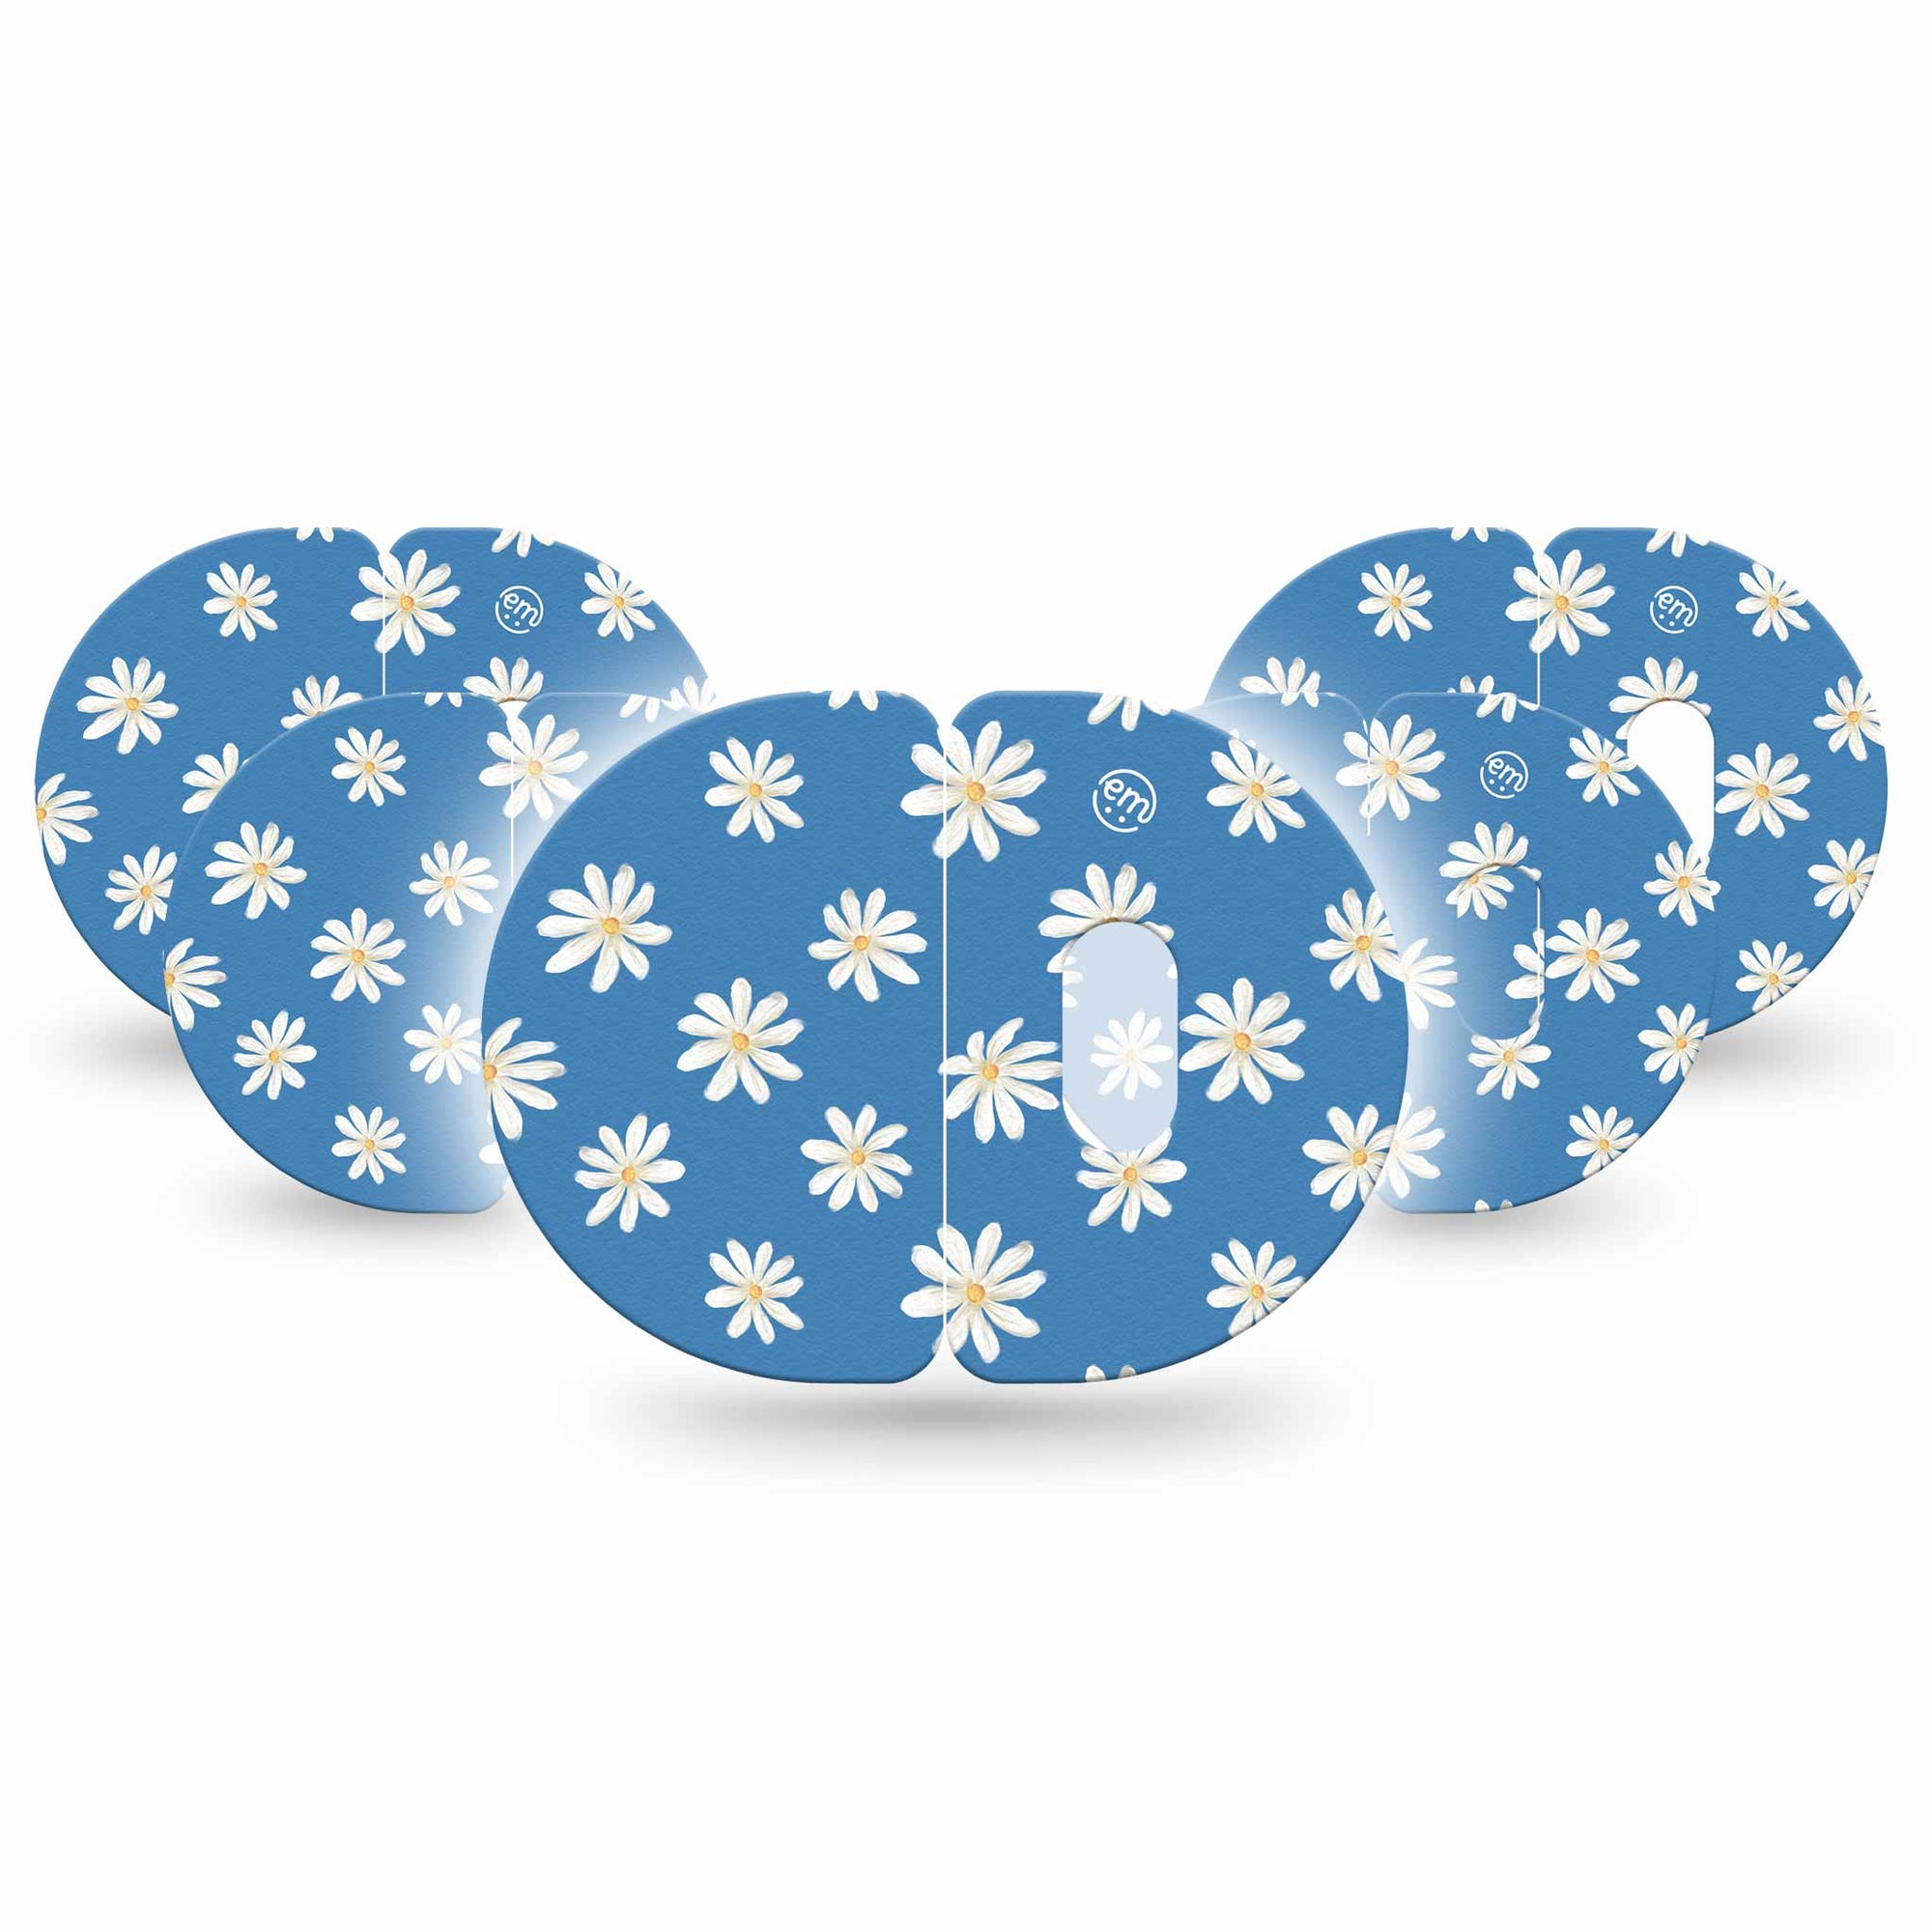 Medtronic Enlite / Guardian ExpressionMed Painted Daisies 2-Piece Enlite Medtronic Tape, Single, Daisy Print CGM Adhesive Tape Design, 5 Tapes